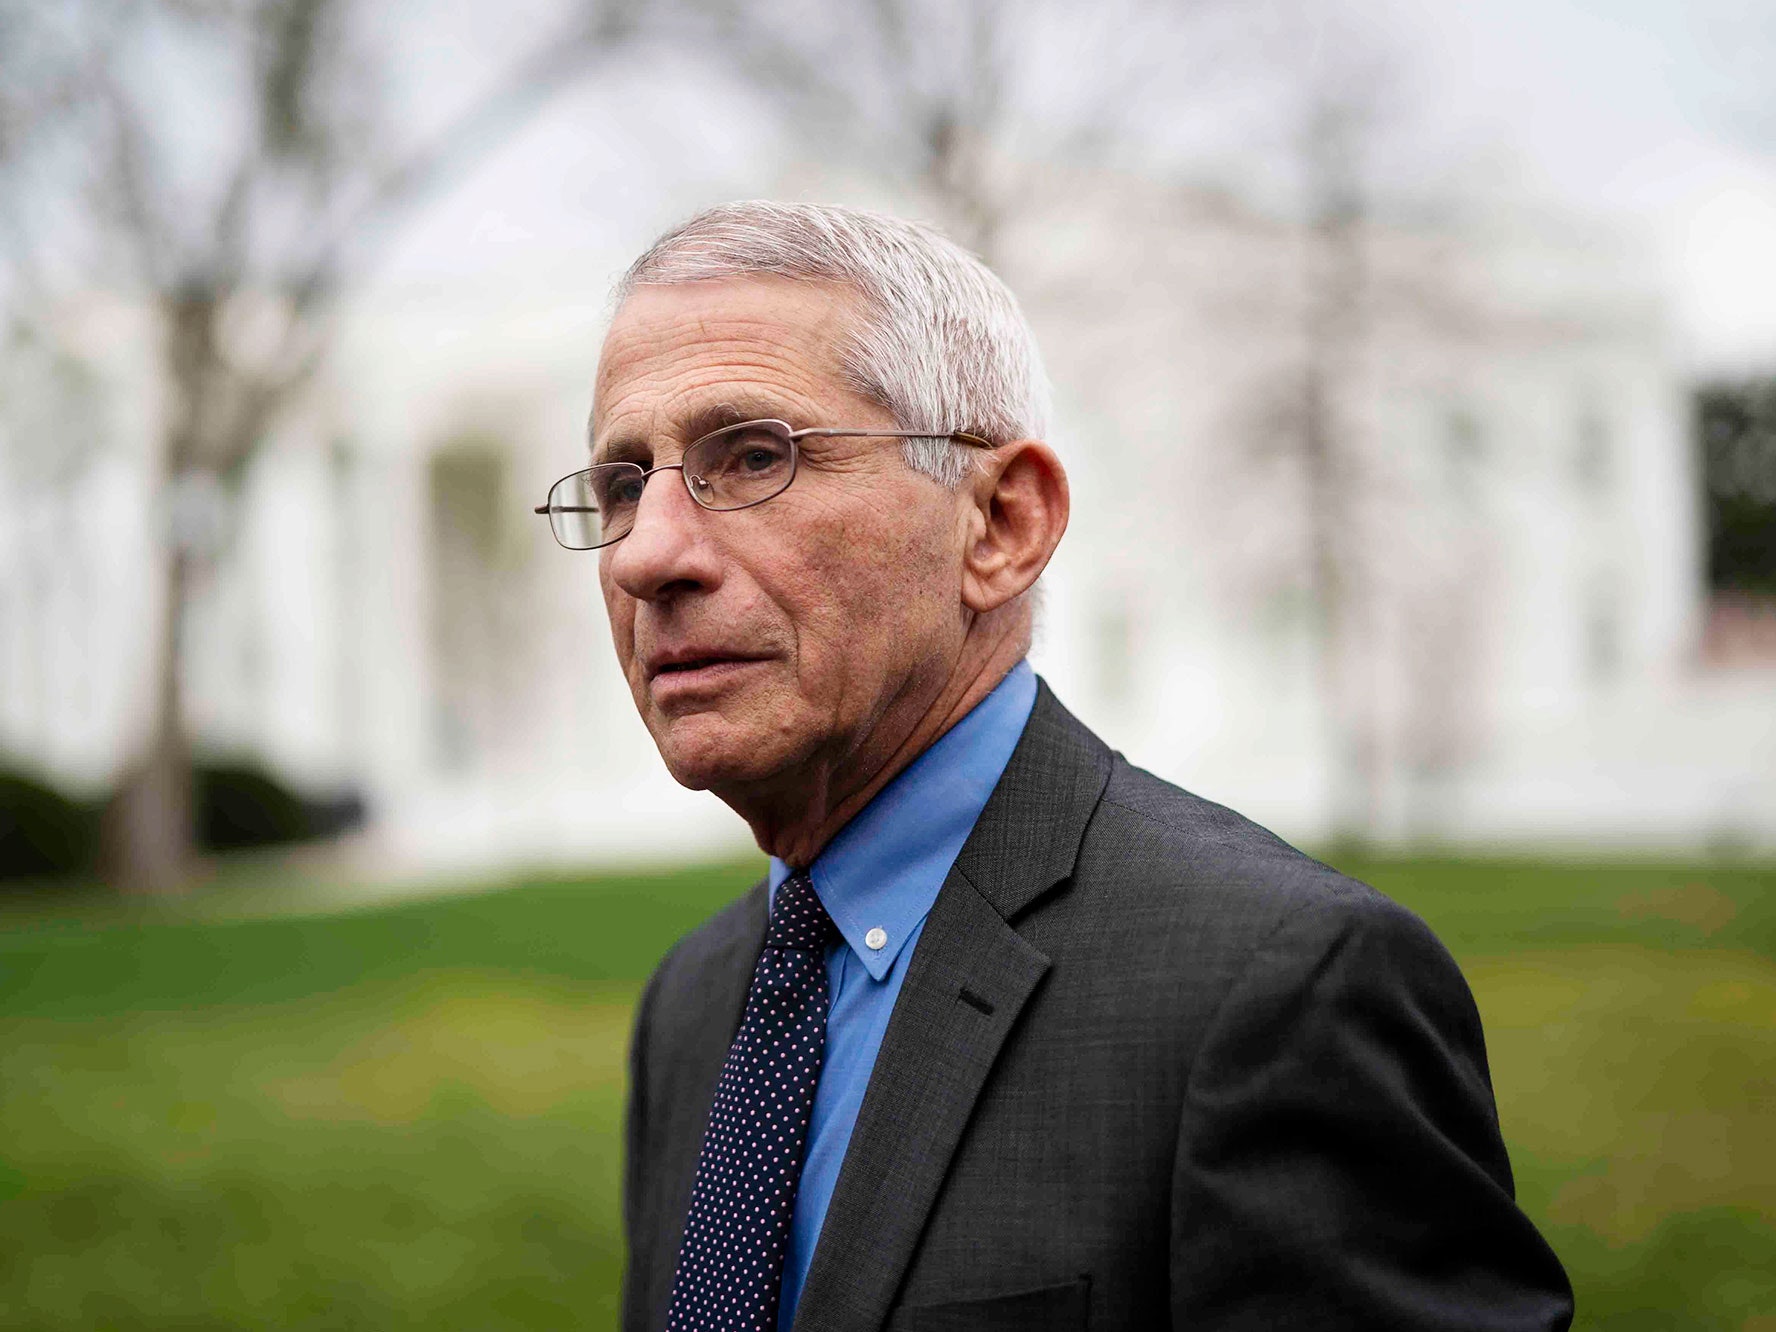 Covid vaccine result could come by end of 2020 – Dr Fauci